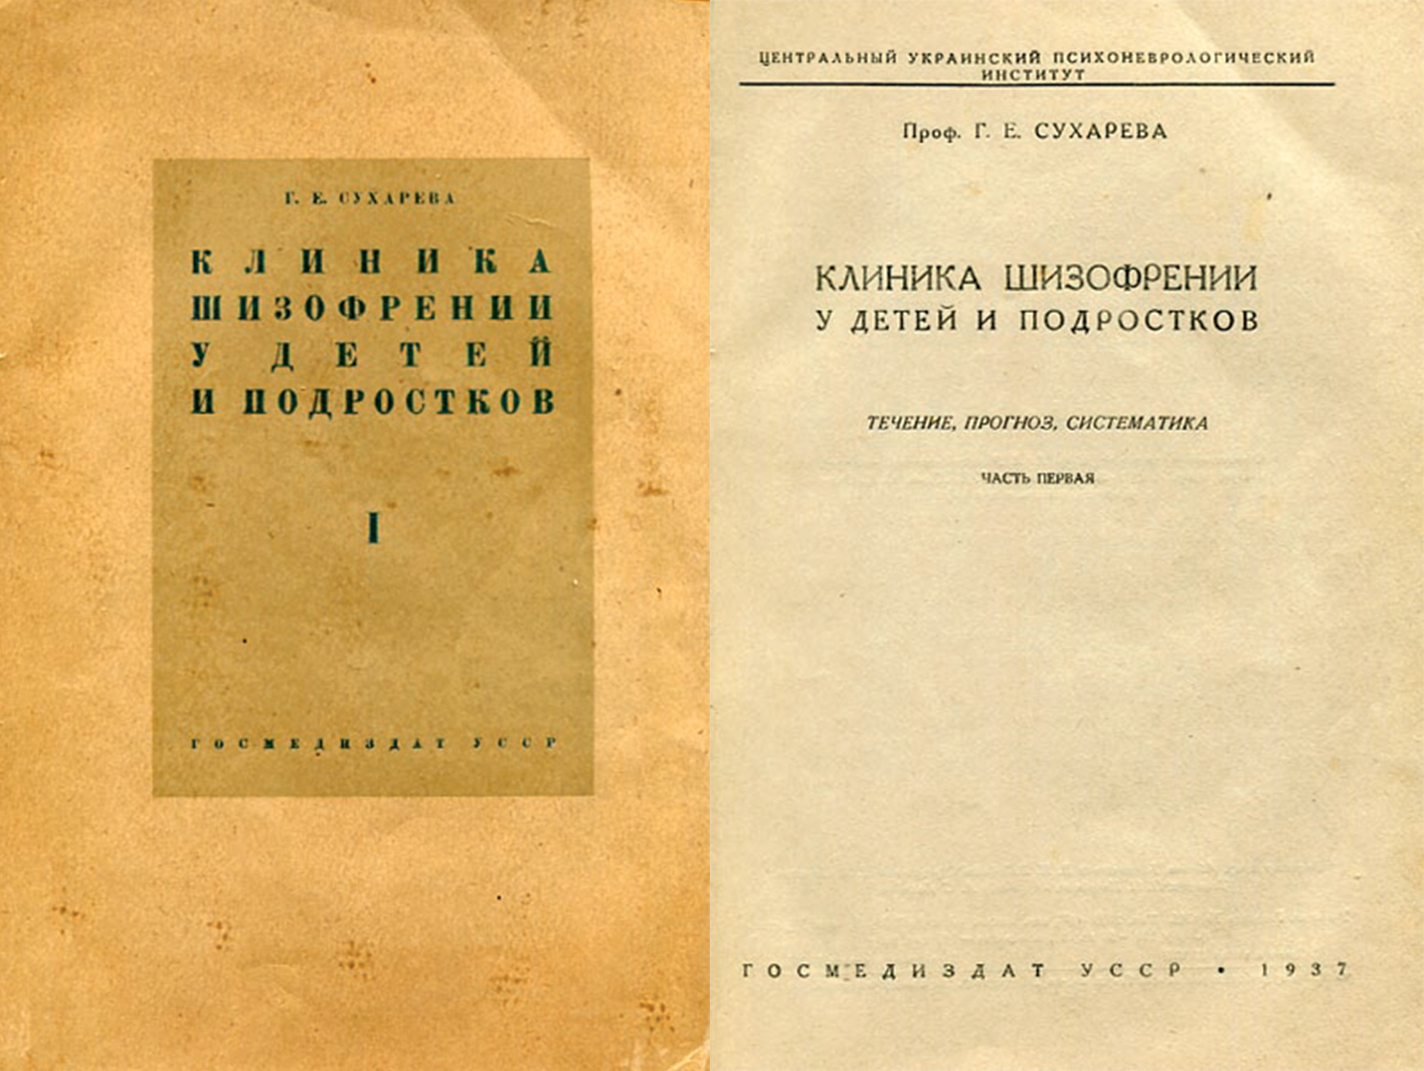 Pages from a book by Grunya Sukhareva.